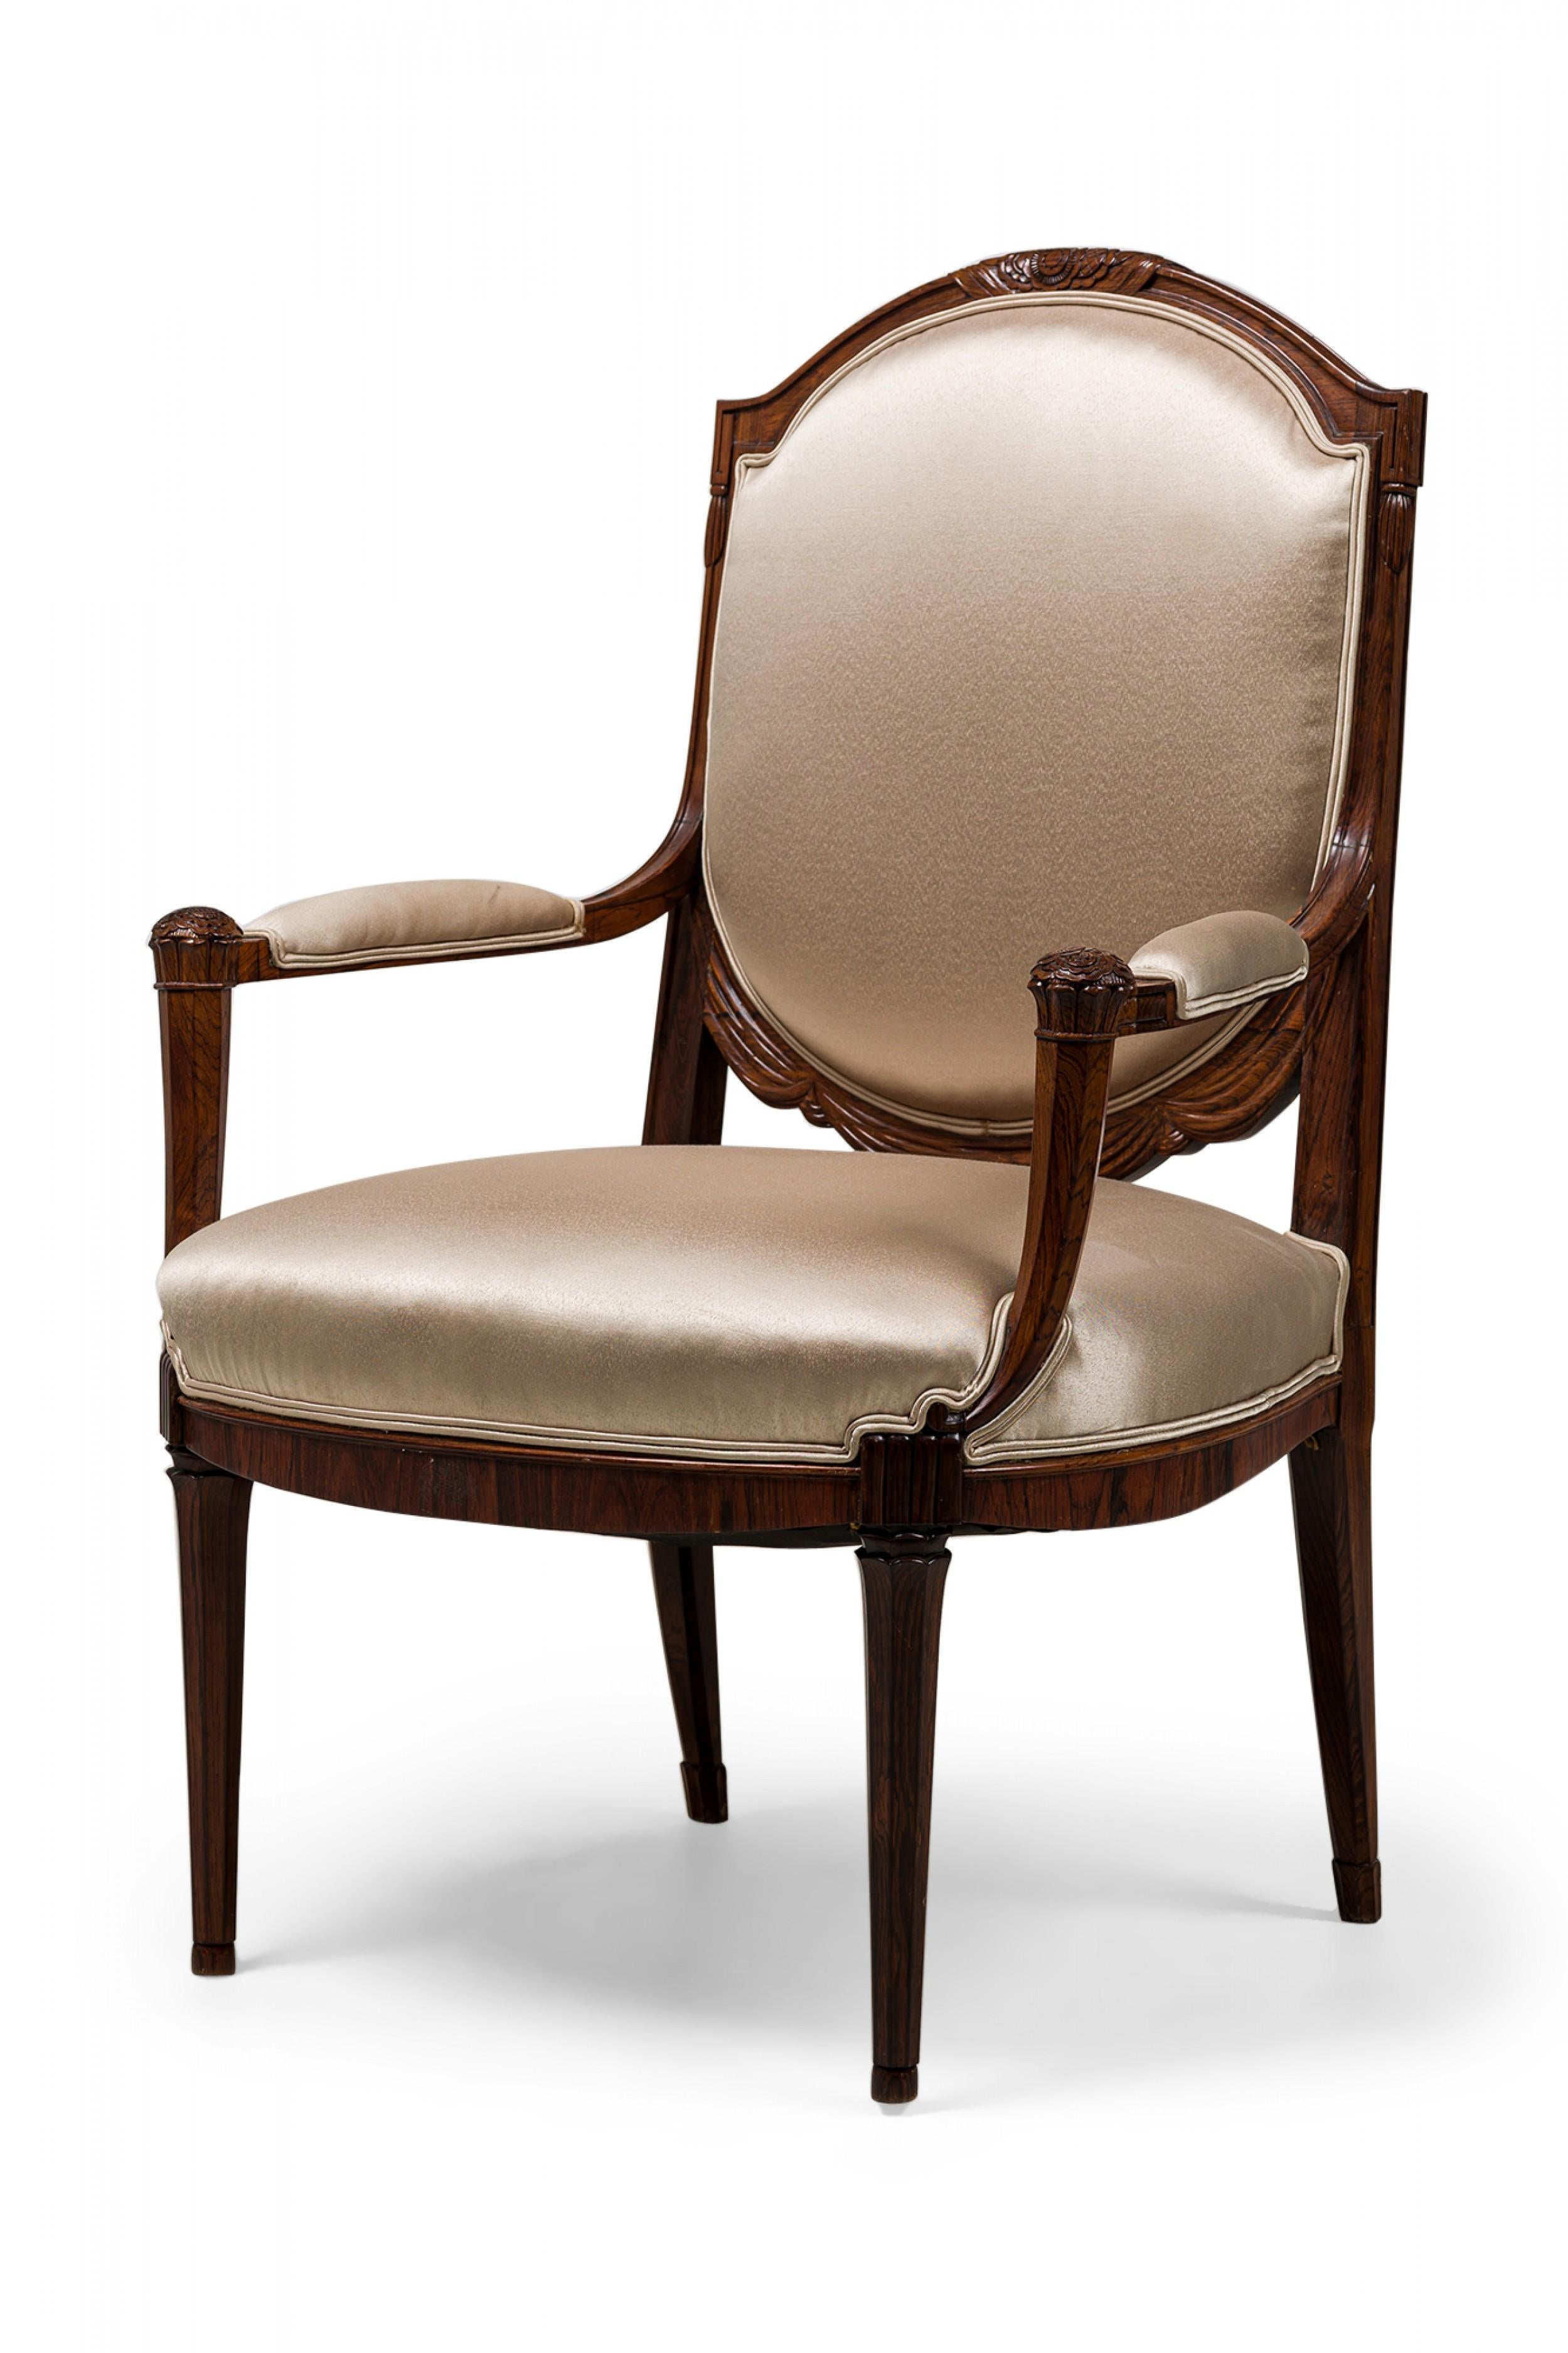 20th Century Pair of Late Art Deco French Mahogany Beige Sateen Upholstered Armchairs For Sale